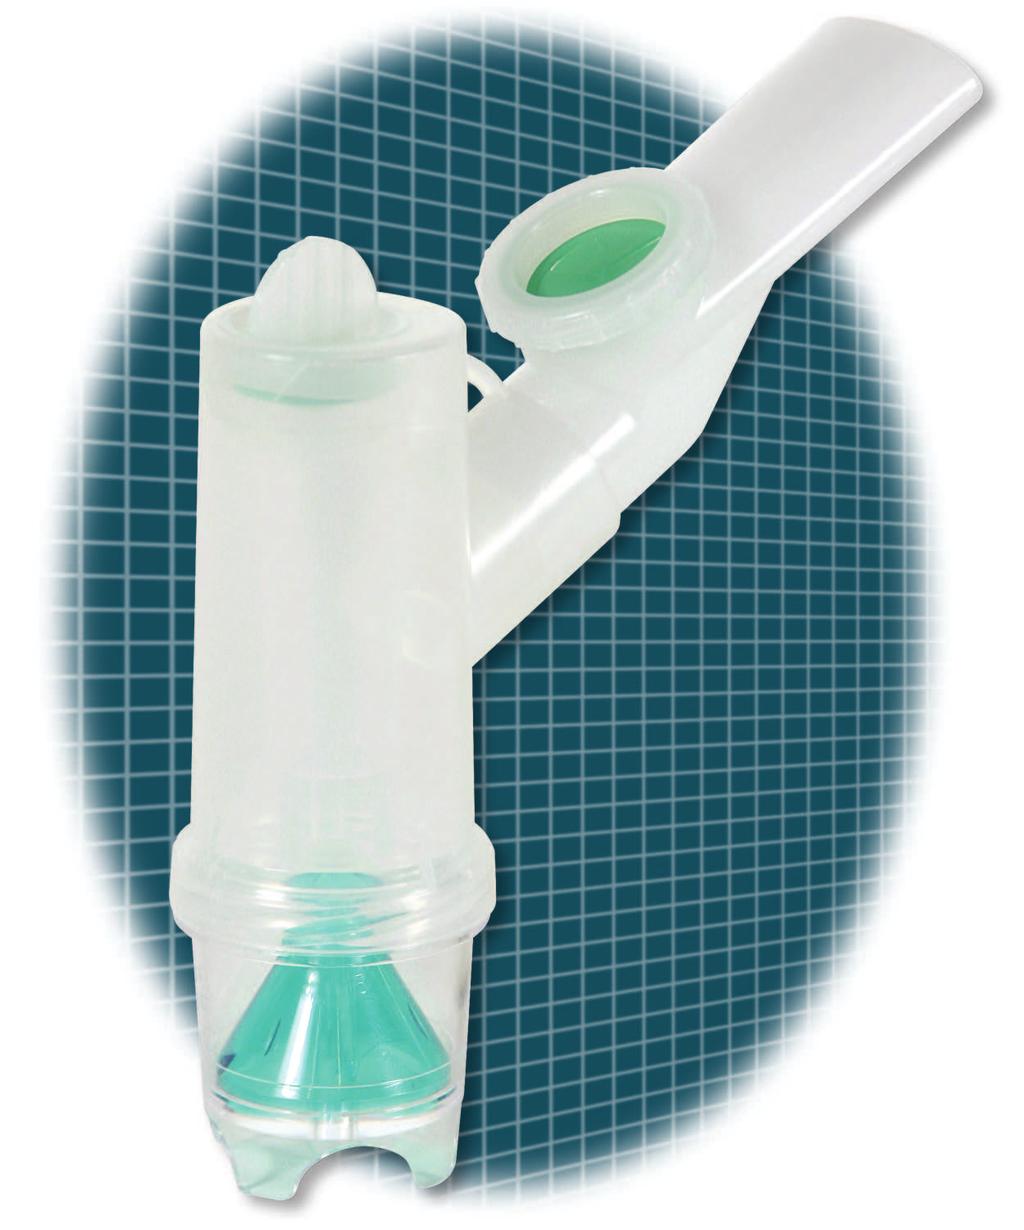 Latex Free Breath Enhanced High Density Jet Nebulizer The NebuTech HDN nebulizer, a breath enhanced design, by Salter Labs is quickly becoming the product of choice for caregivers and patients alike.